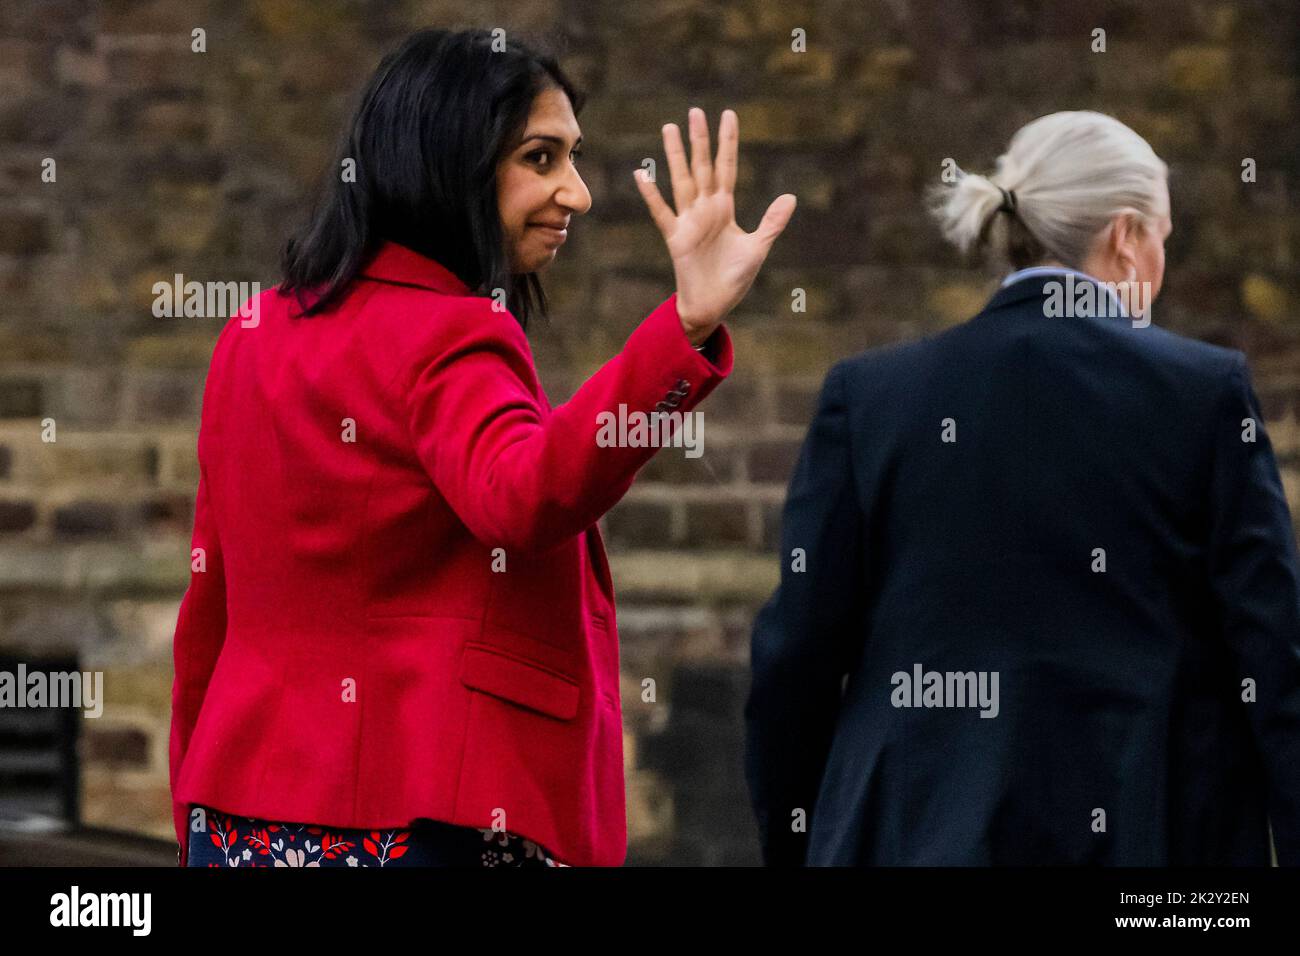 London, UK. 23rd Sep, 2022. Suella Braverman, Home Secretary - Leaving after the Cabinet meeting before The Chancellor leaves Downing Street to make a statement on the government's plans for growth. Credit: Guy Bell/Alamy Live News Stock Photo